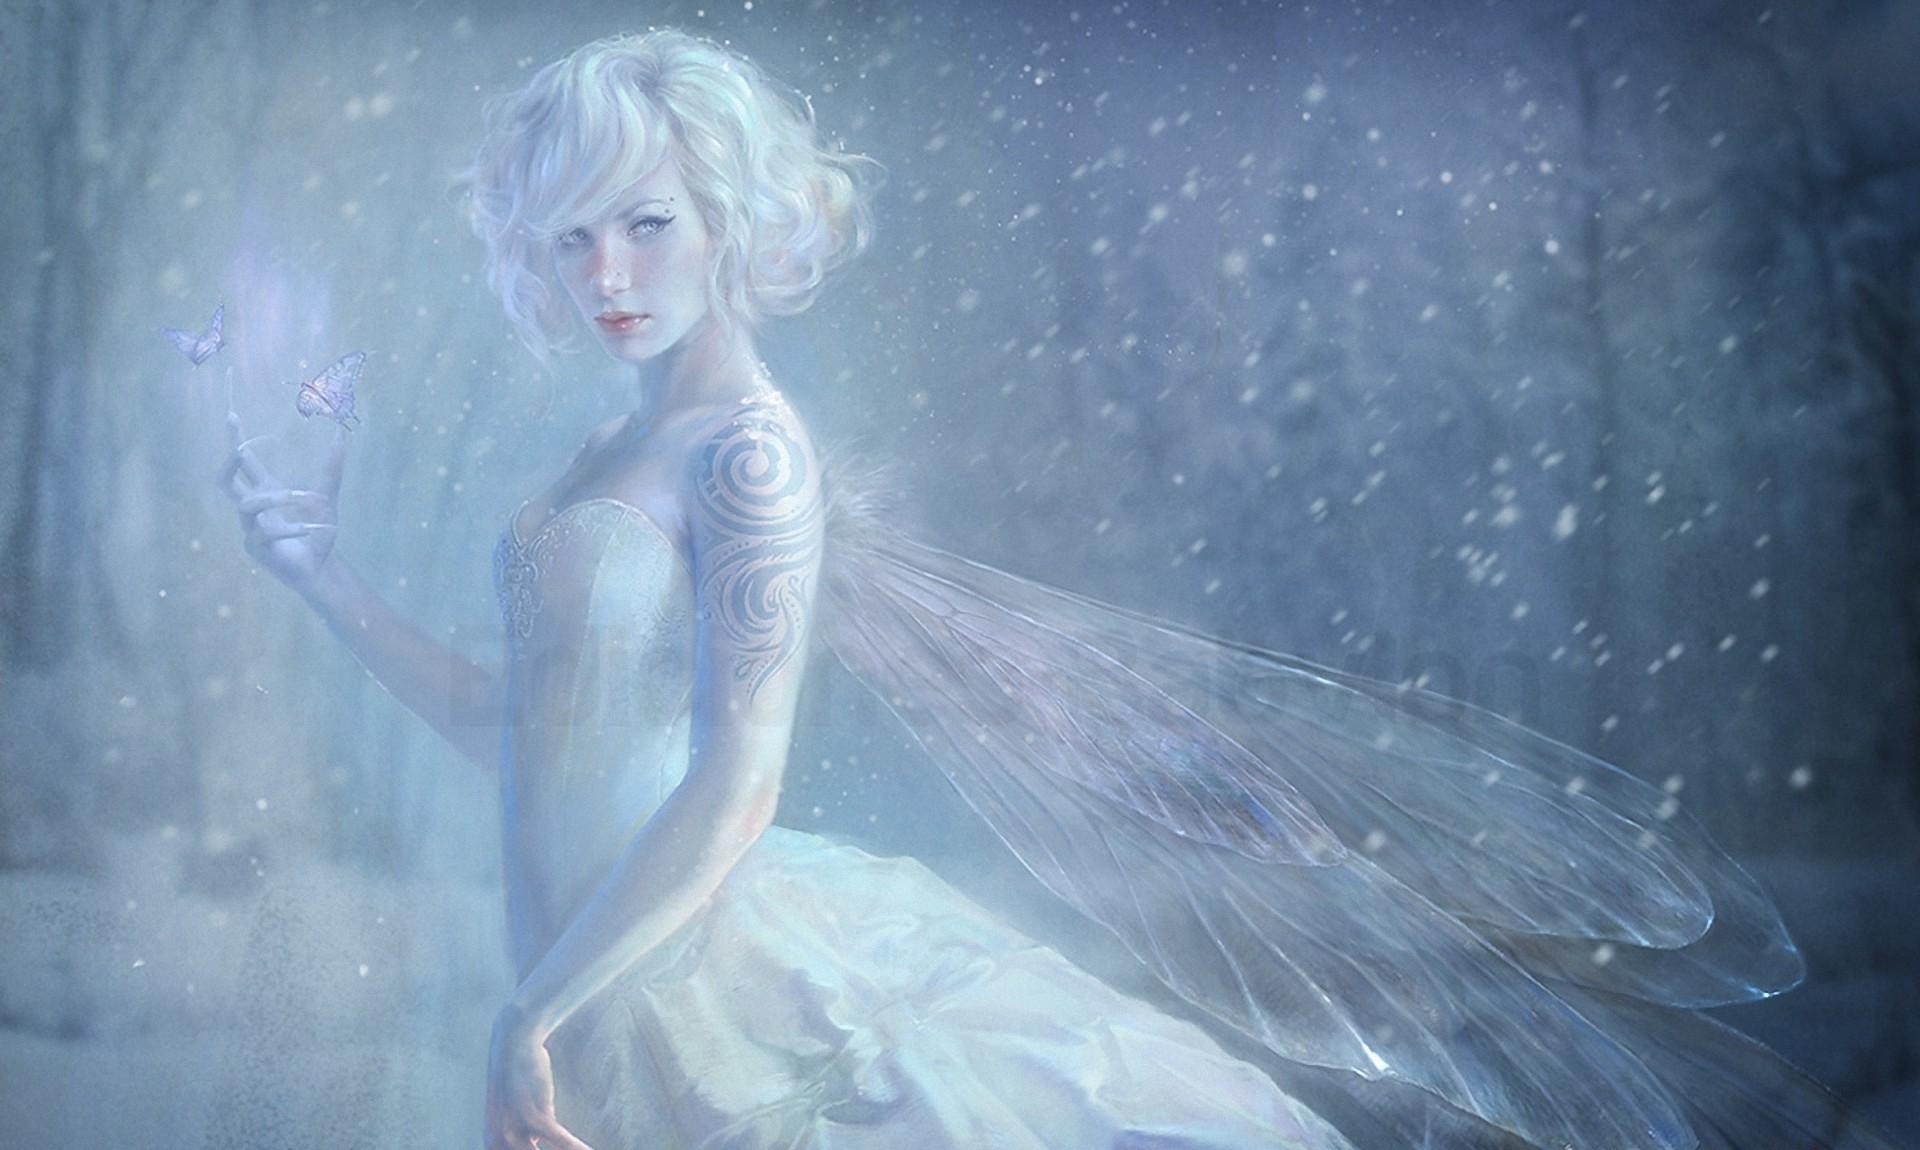 blonde-anime-angel-snow-winter-blue-underwater-girl-fairy-screenshot-computer-wallpaper-fictional-character-mythical-creature-butterfly-when-641734.jpg